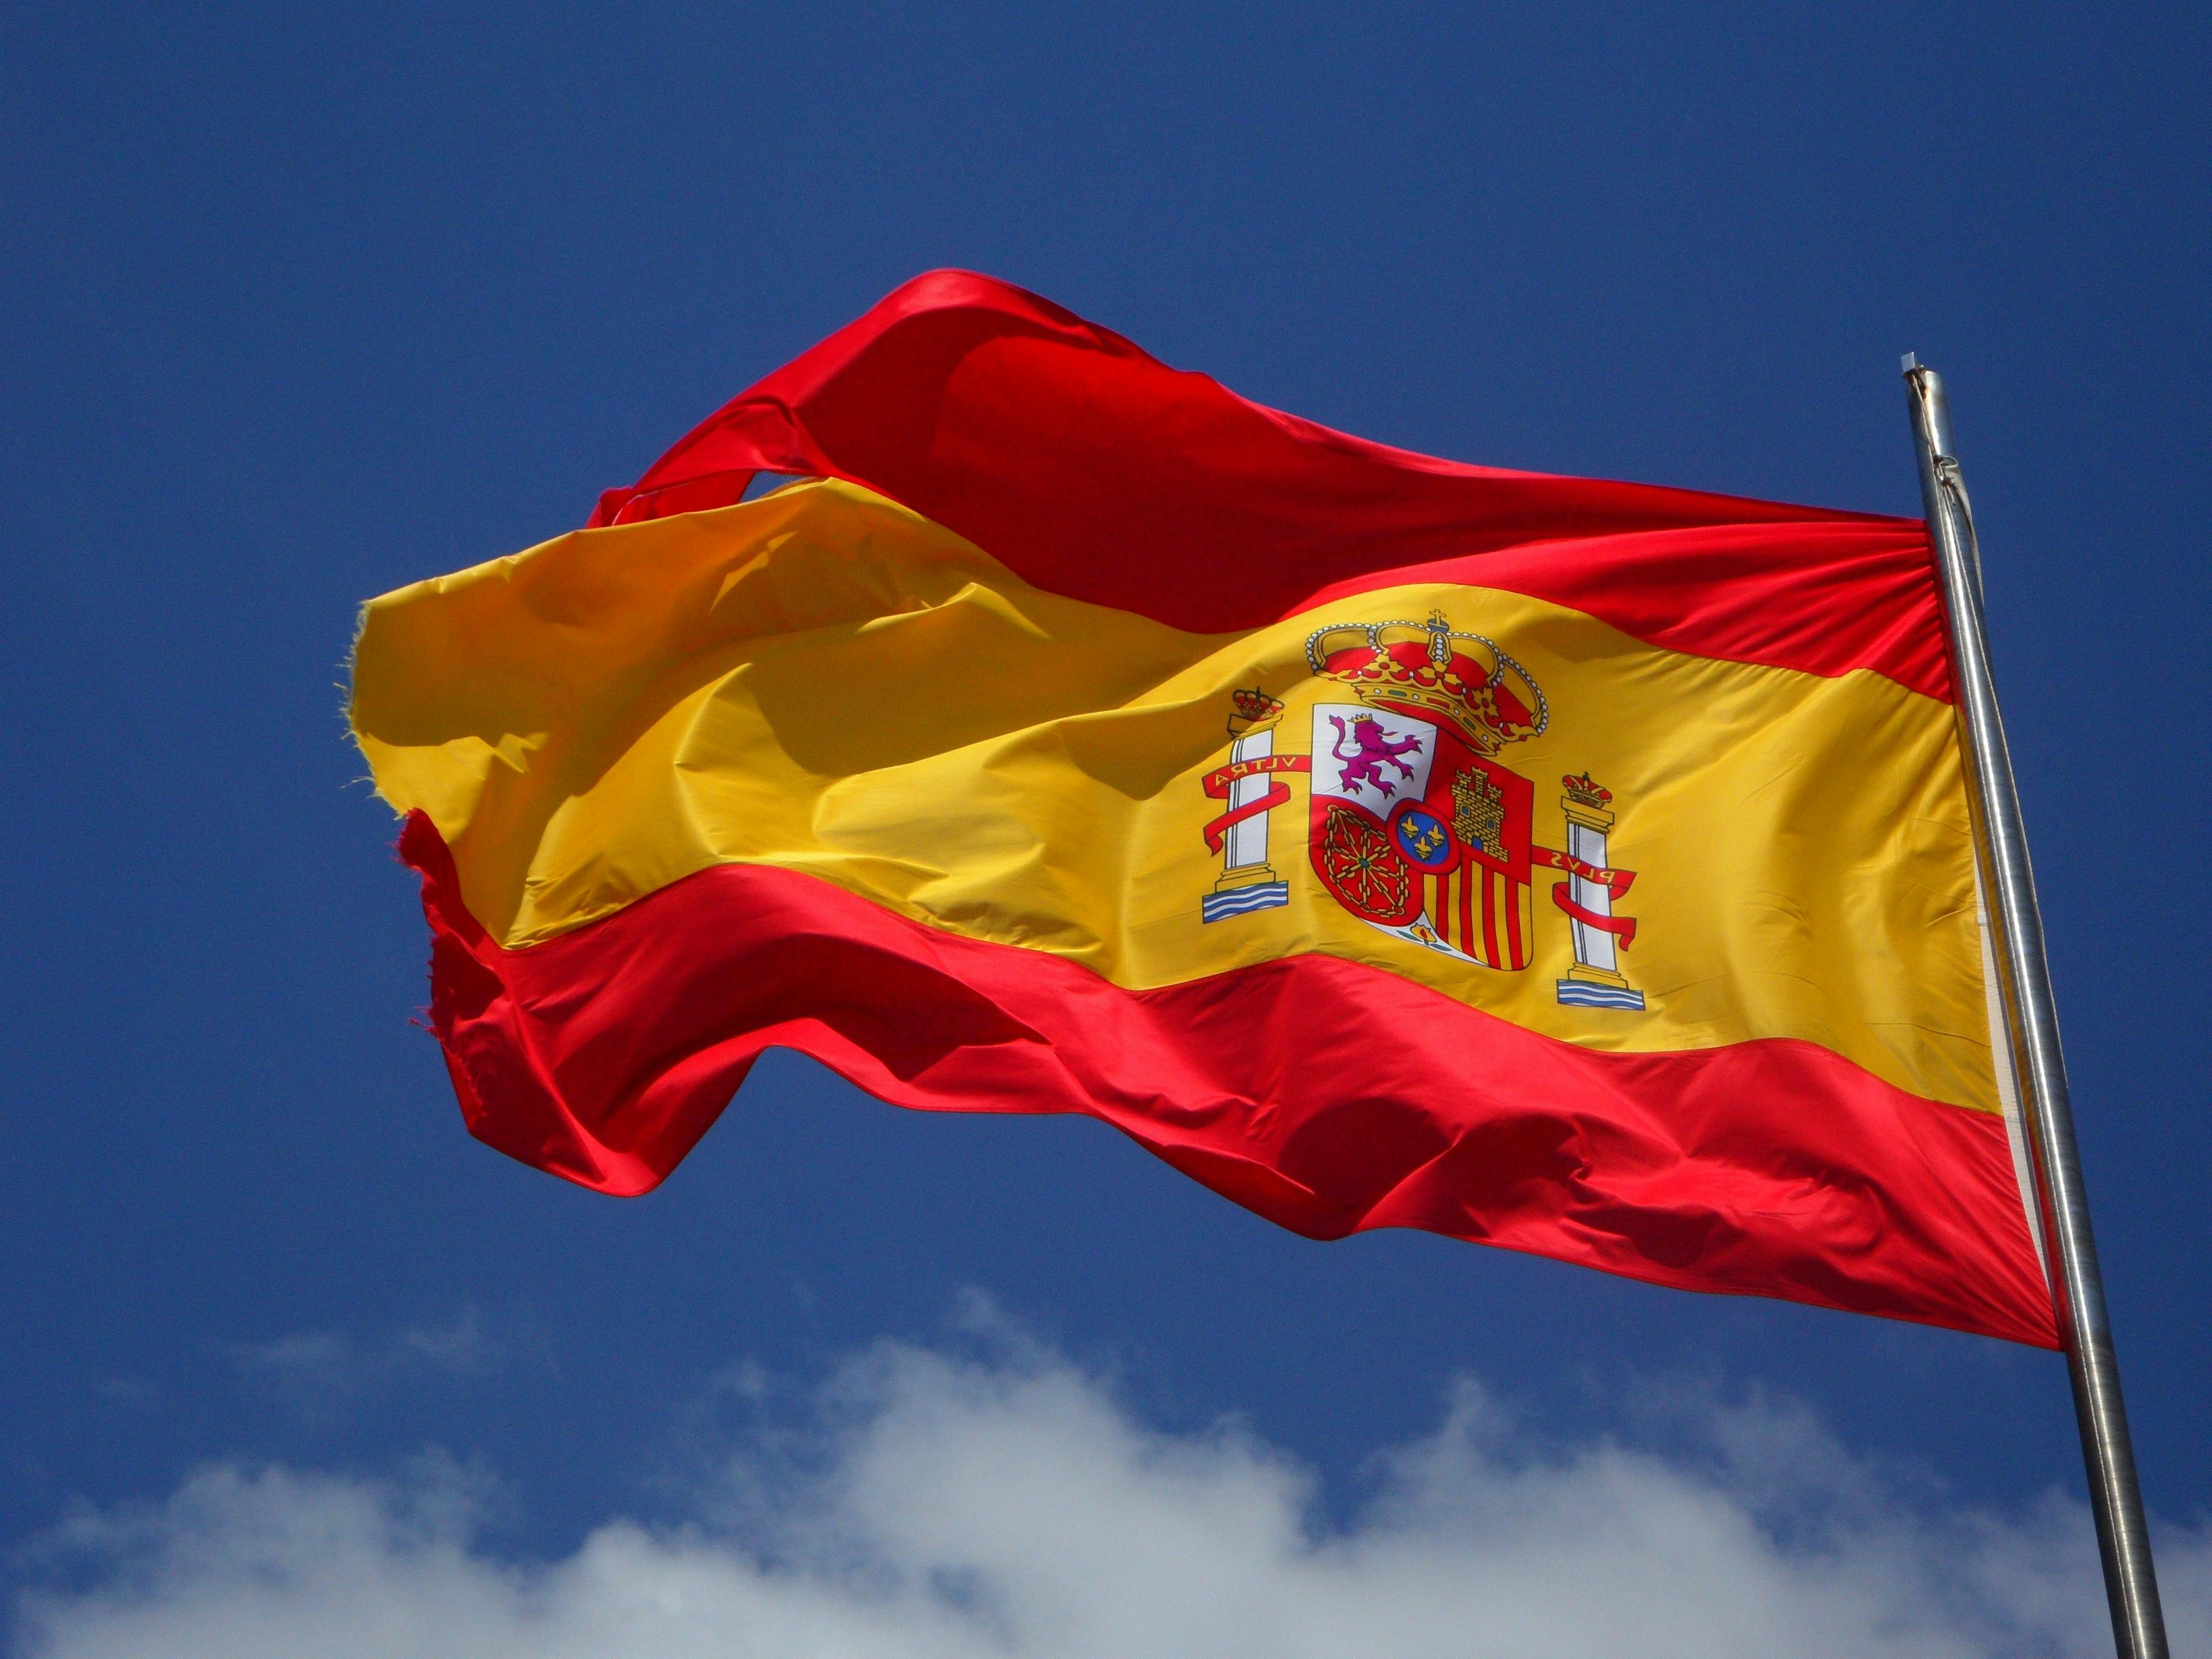 A Spanish flag flying in the wind